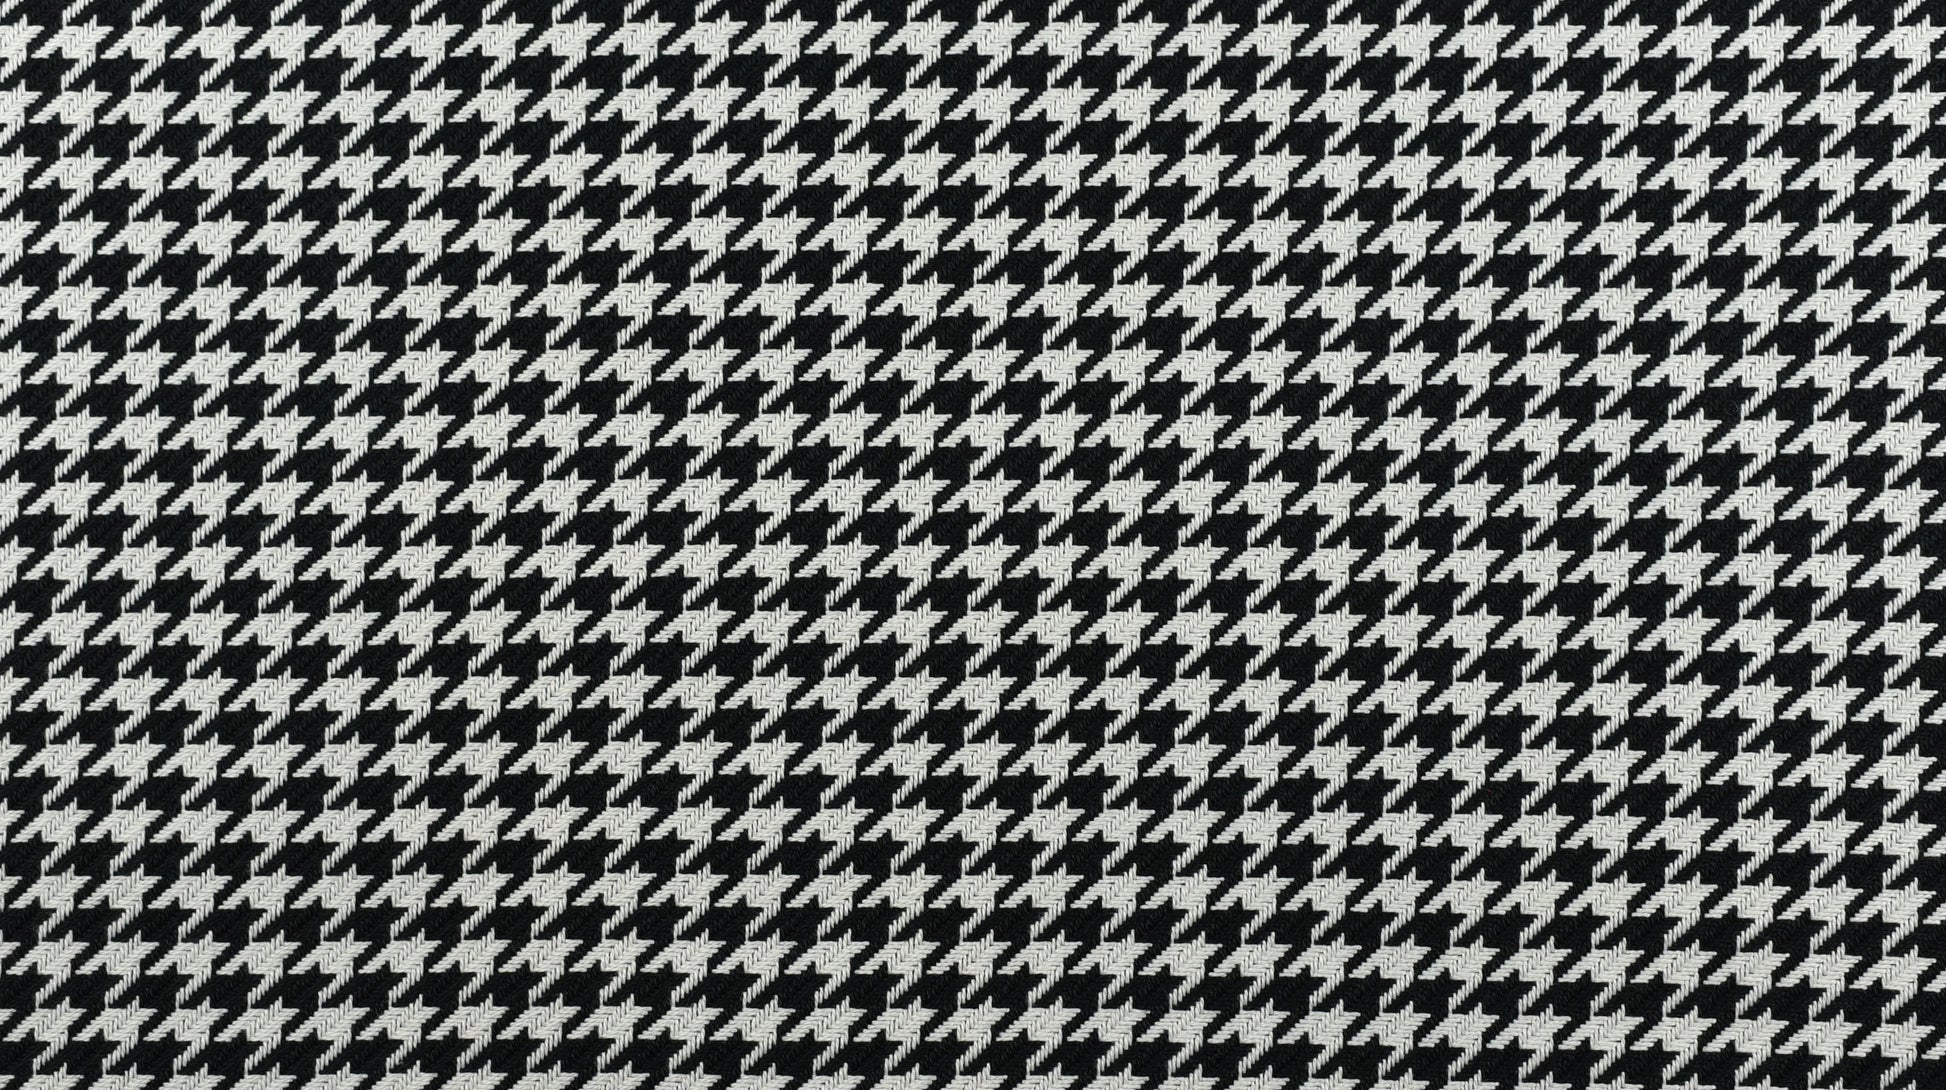 Woven Houndstooth Heavy Duty Upholstery Fabric In Black and white 55" Width-Fabric By The Yard 9A-Black&White